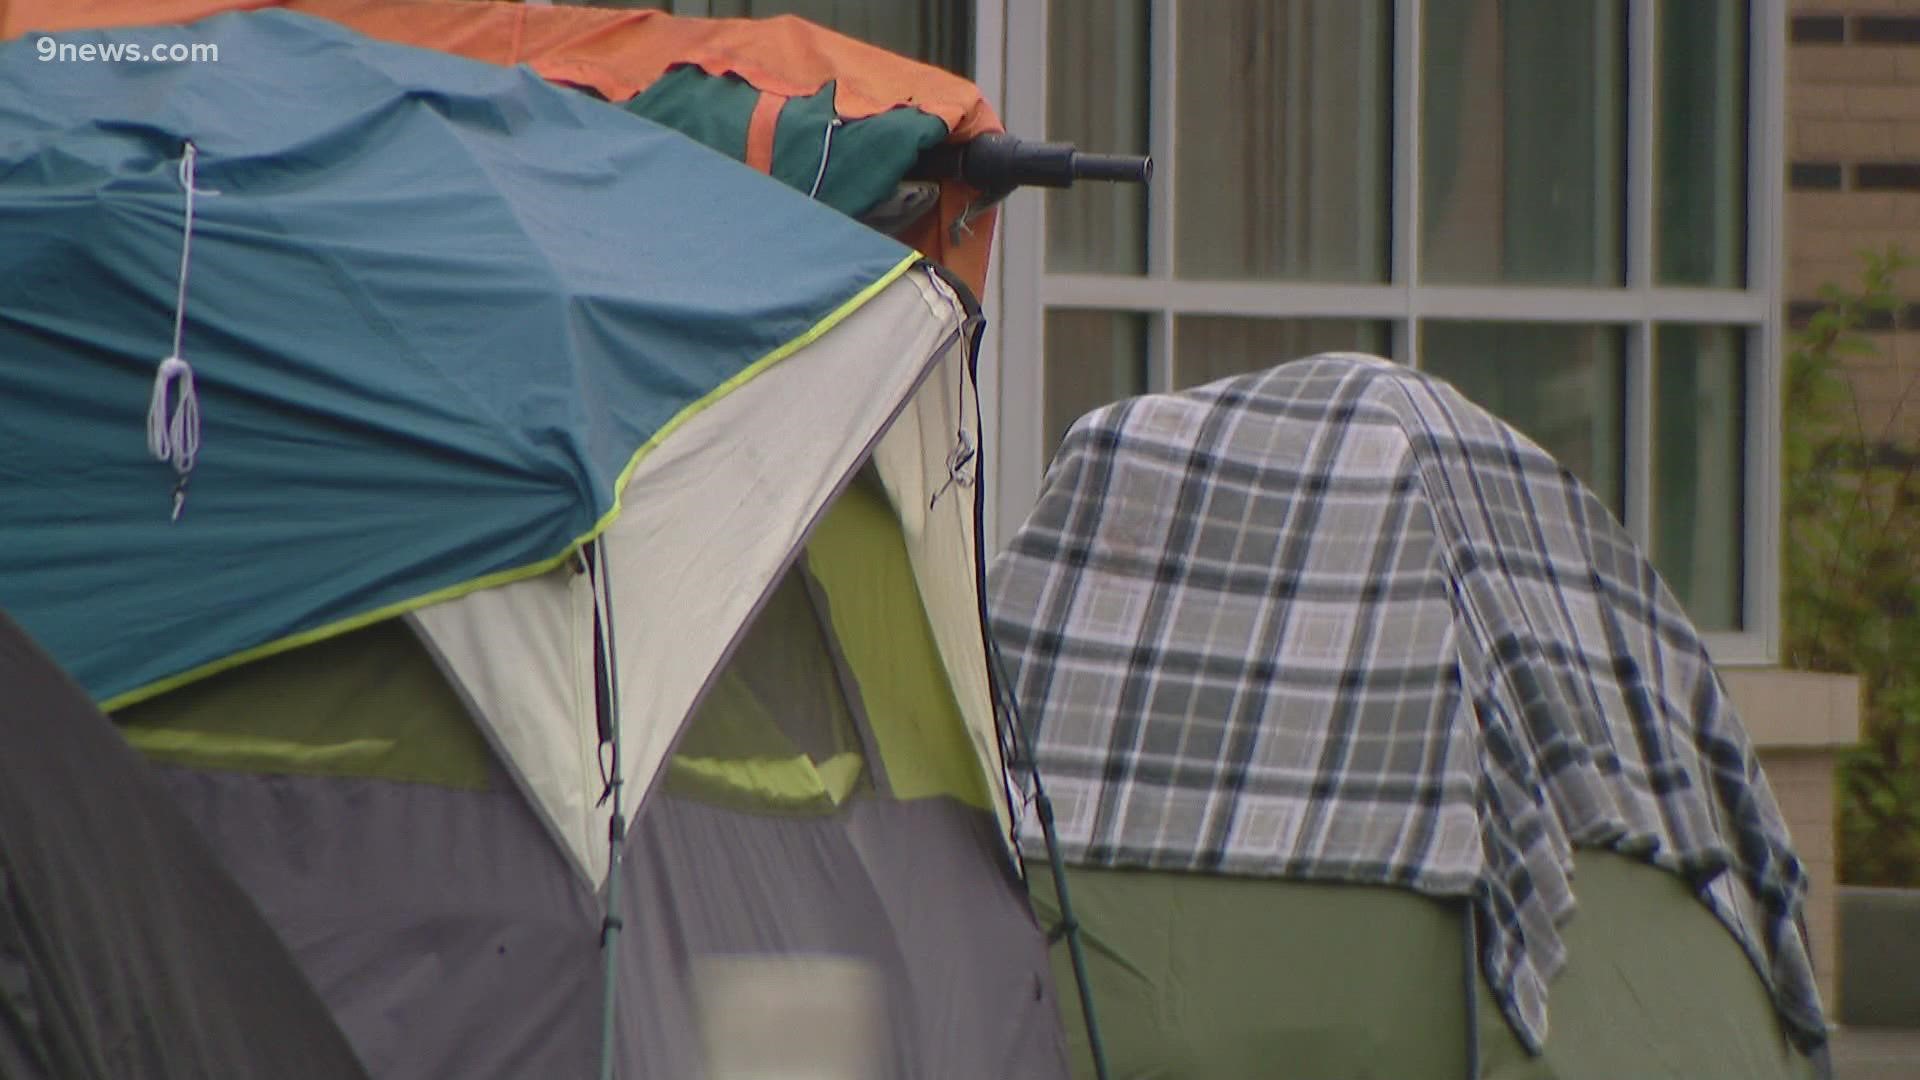 A coalition of neighborhood groups are calling on the City of Denver to create more sanctioned homeless sites in addition to the four sites that exist now.